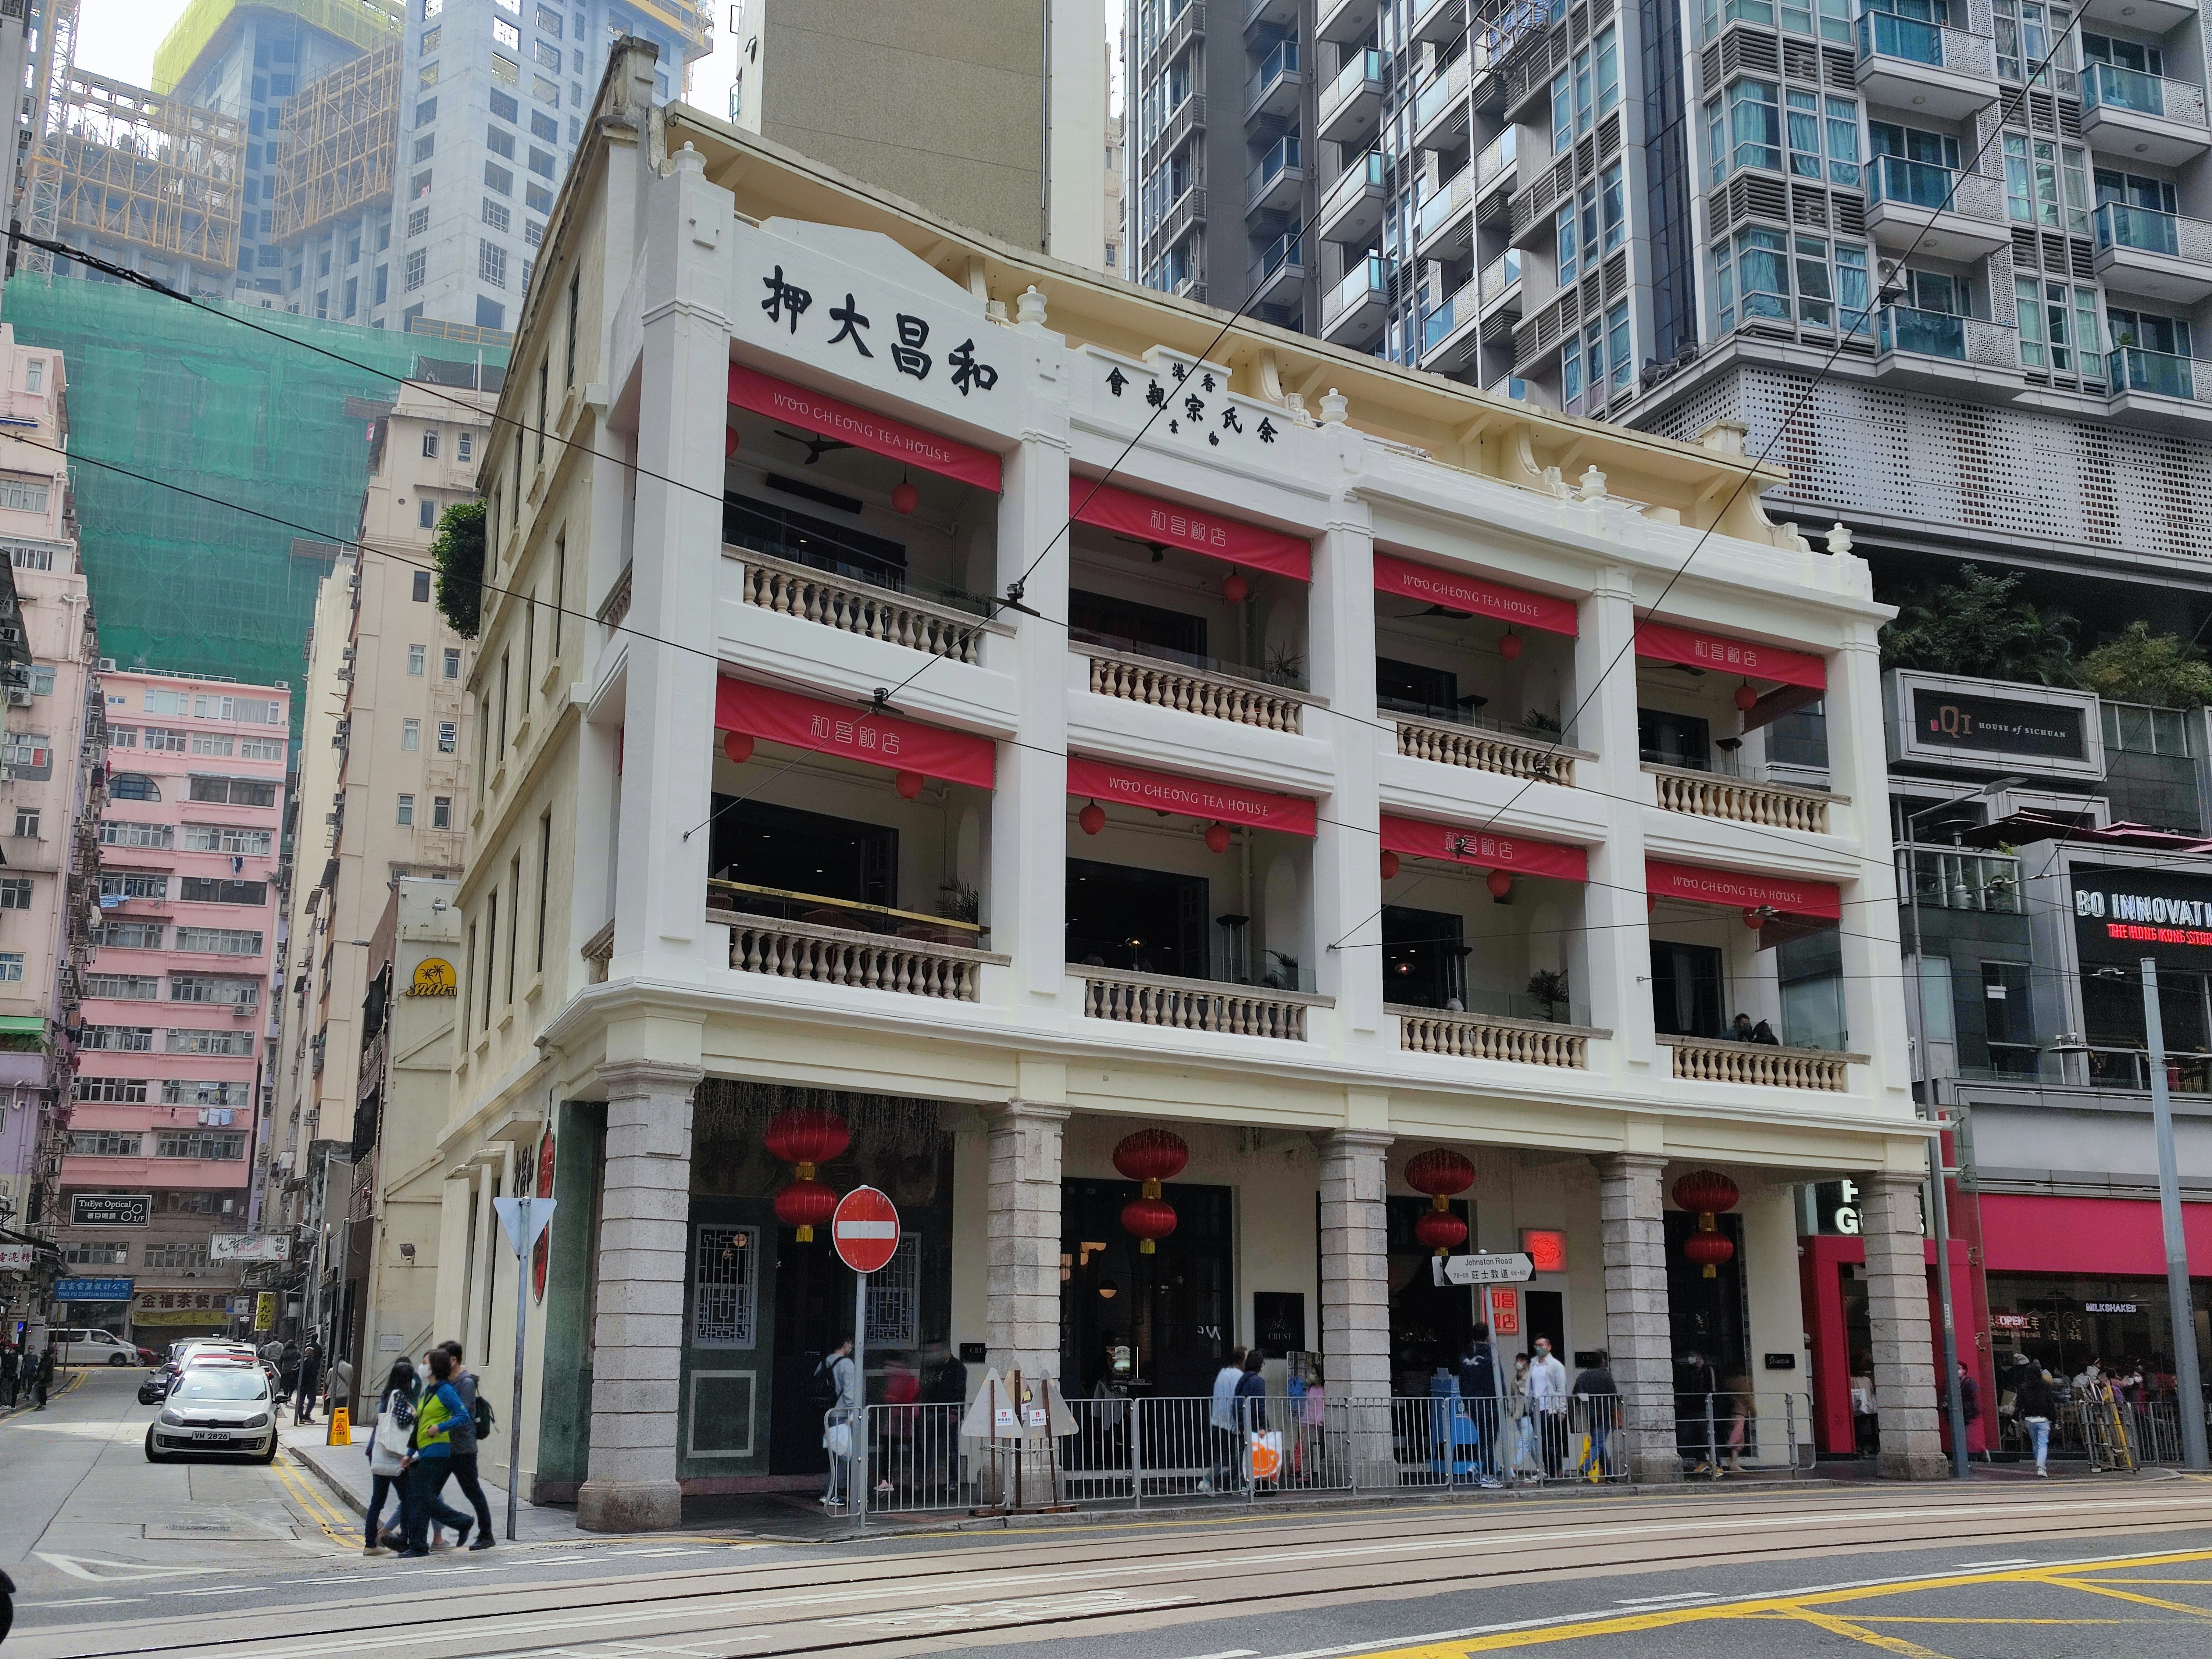 A historical building commonly known as Woo Cheong Pawn Shop. Comprised of 4 buildings, this block was built in 1888-1900 before the First World War.It has been renovated and preserved as a historical site with a restaurant operating called Woo Cheong Tea House. It was built on reclaimed land along Wanchai (means small bay) coast of Victoria Harbour. Wanchai was a mixed commercial and residential area in HK's early colonial development. The renovation has preserved the original architecture.The overhanging balconies (騎樓), designed for hot and rainy climate, are similar to ones in Guangzhou.